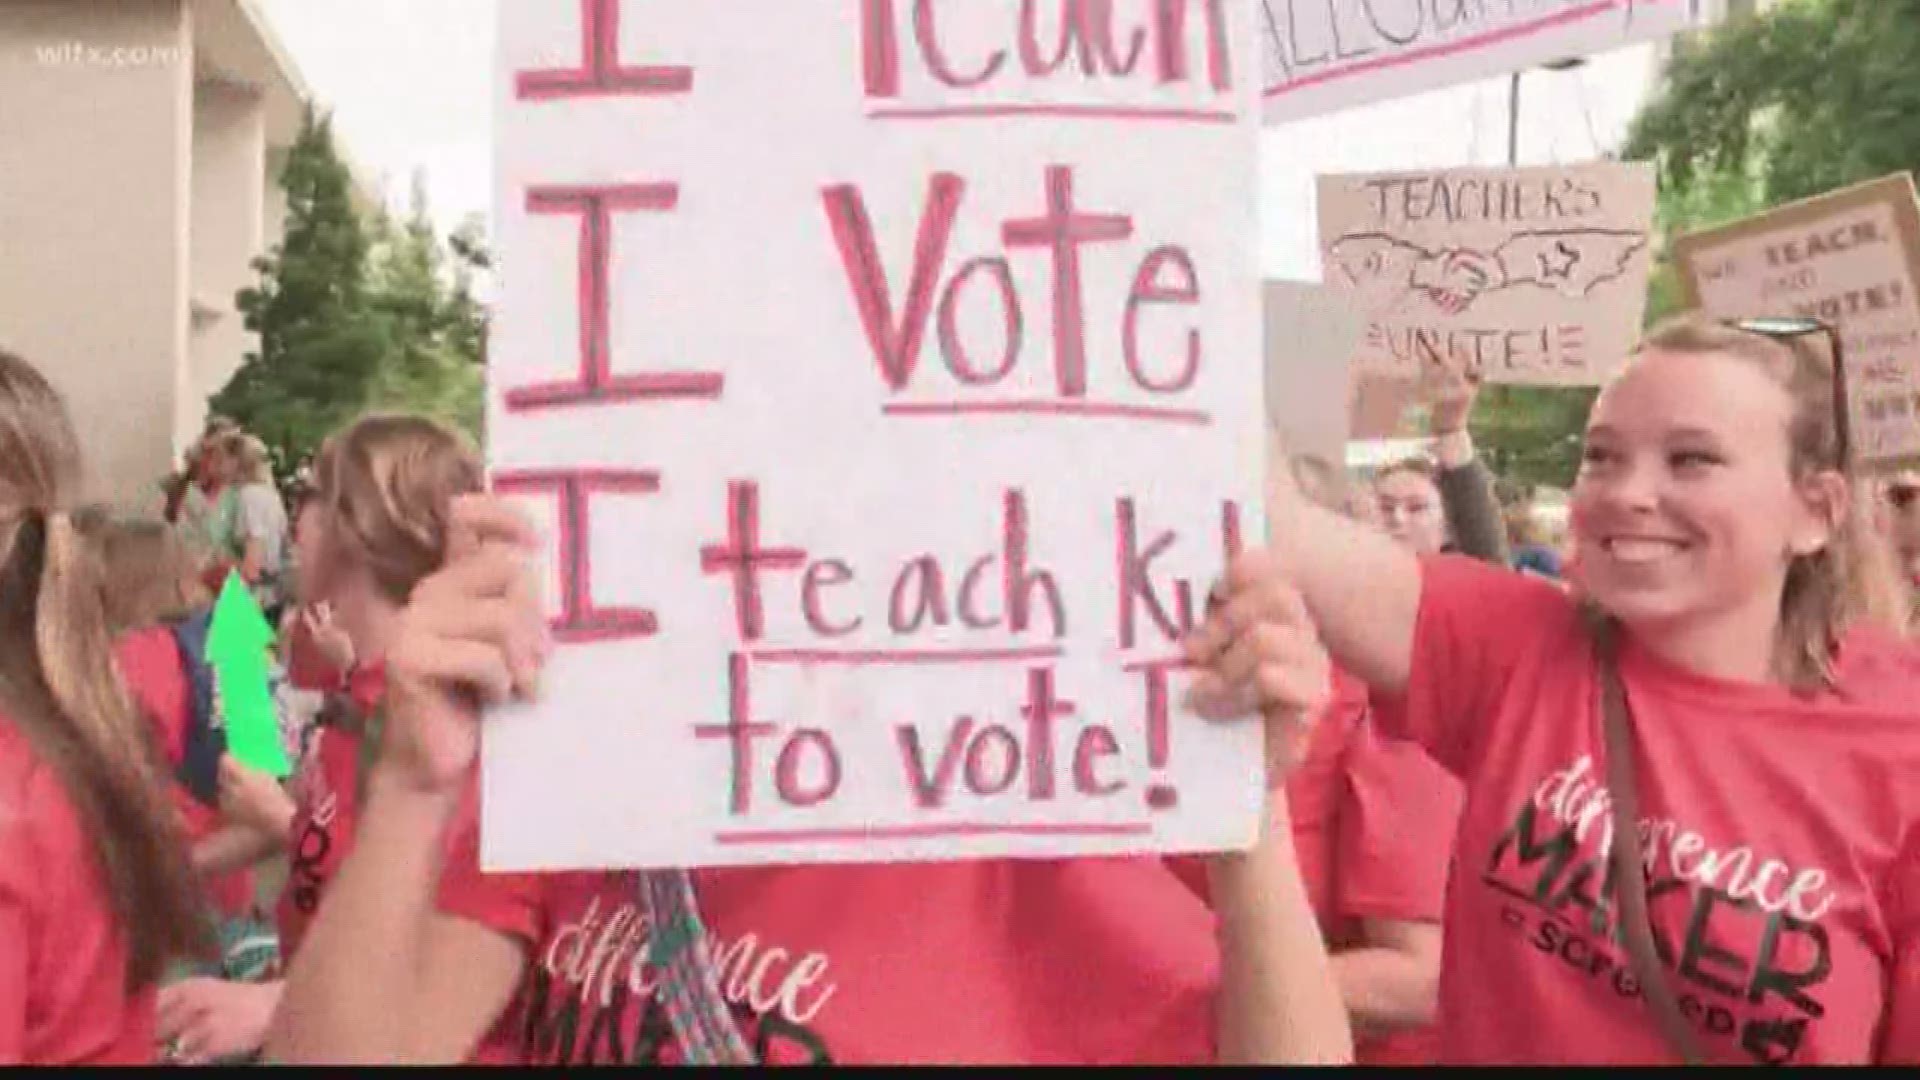 A sea of red took over downtown Columbia for the education rally, the crowd estimate was 10,000 in attendance.